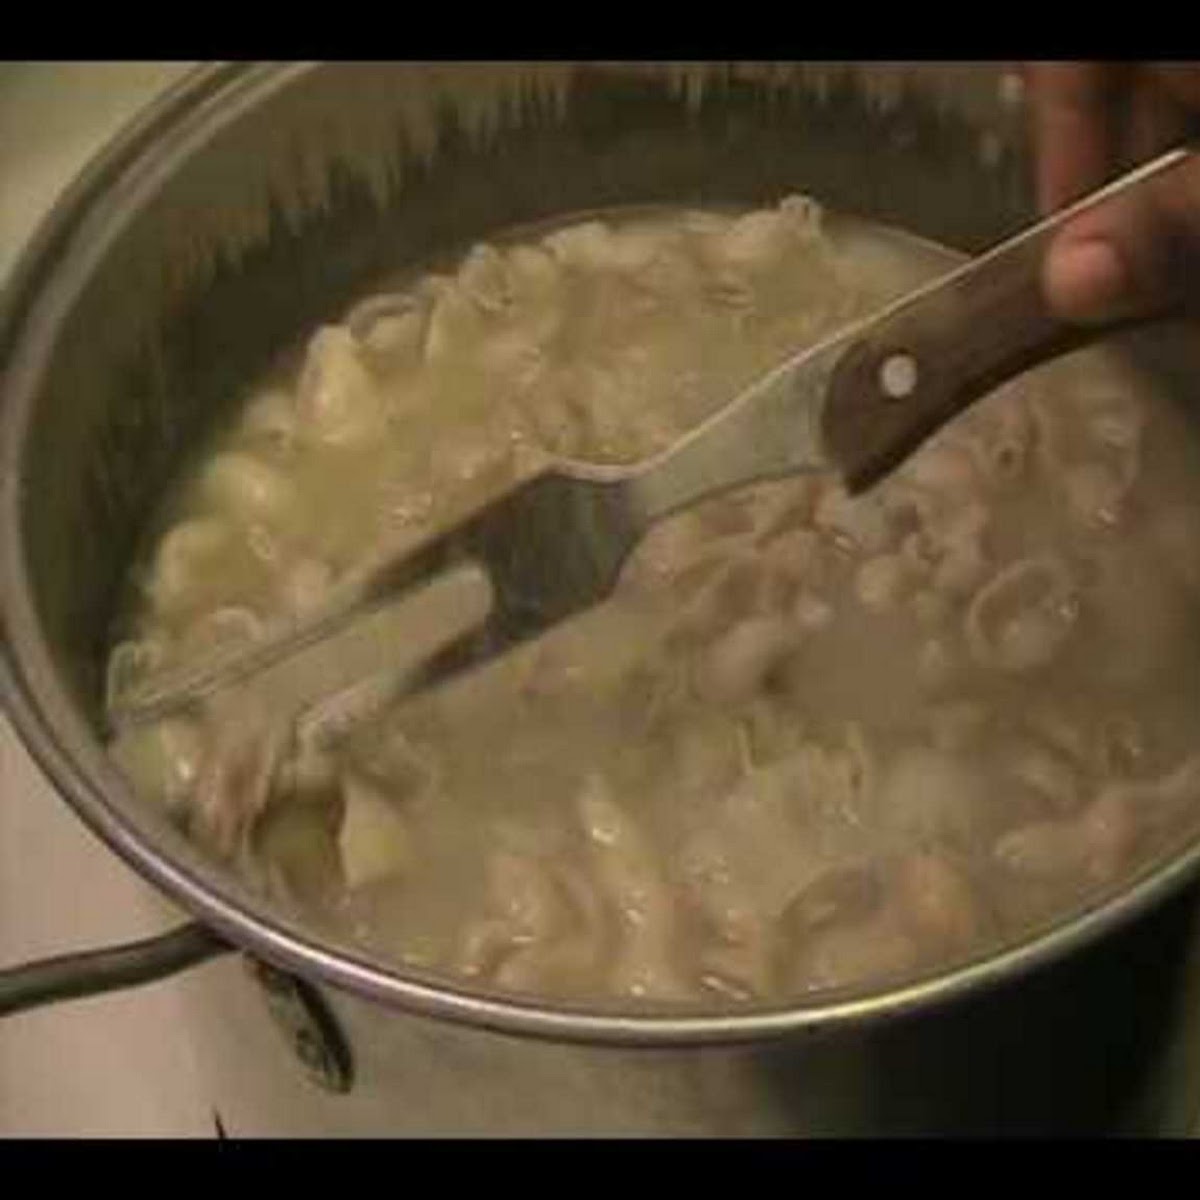 Chitterlings (Chitlins) - Immaculate Bites